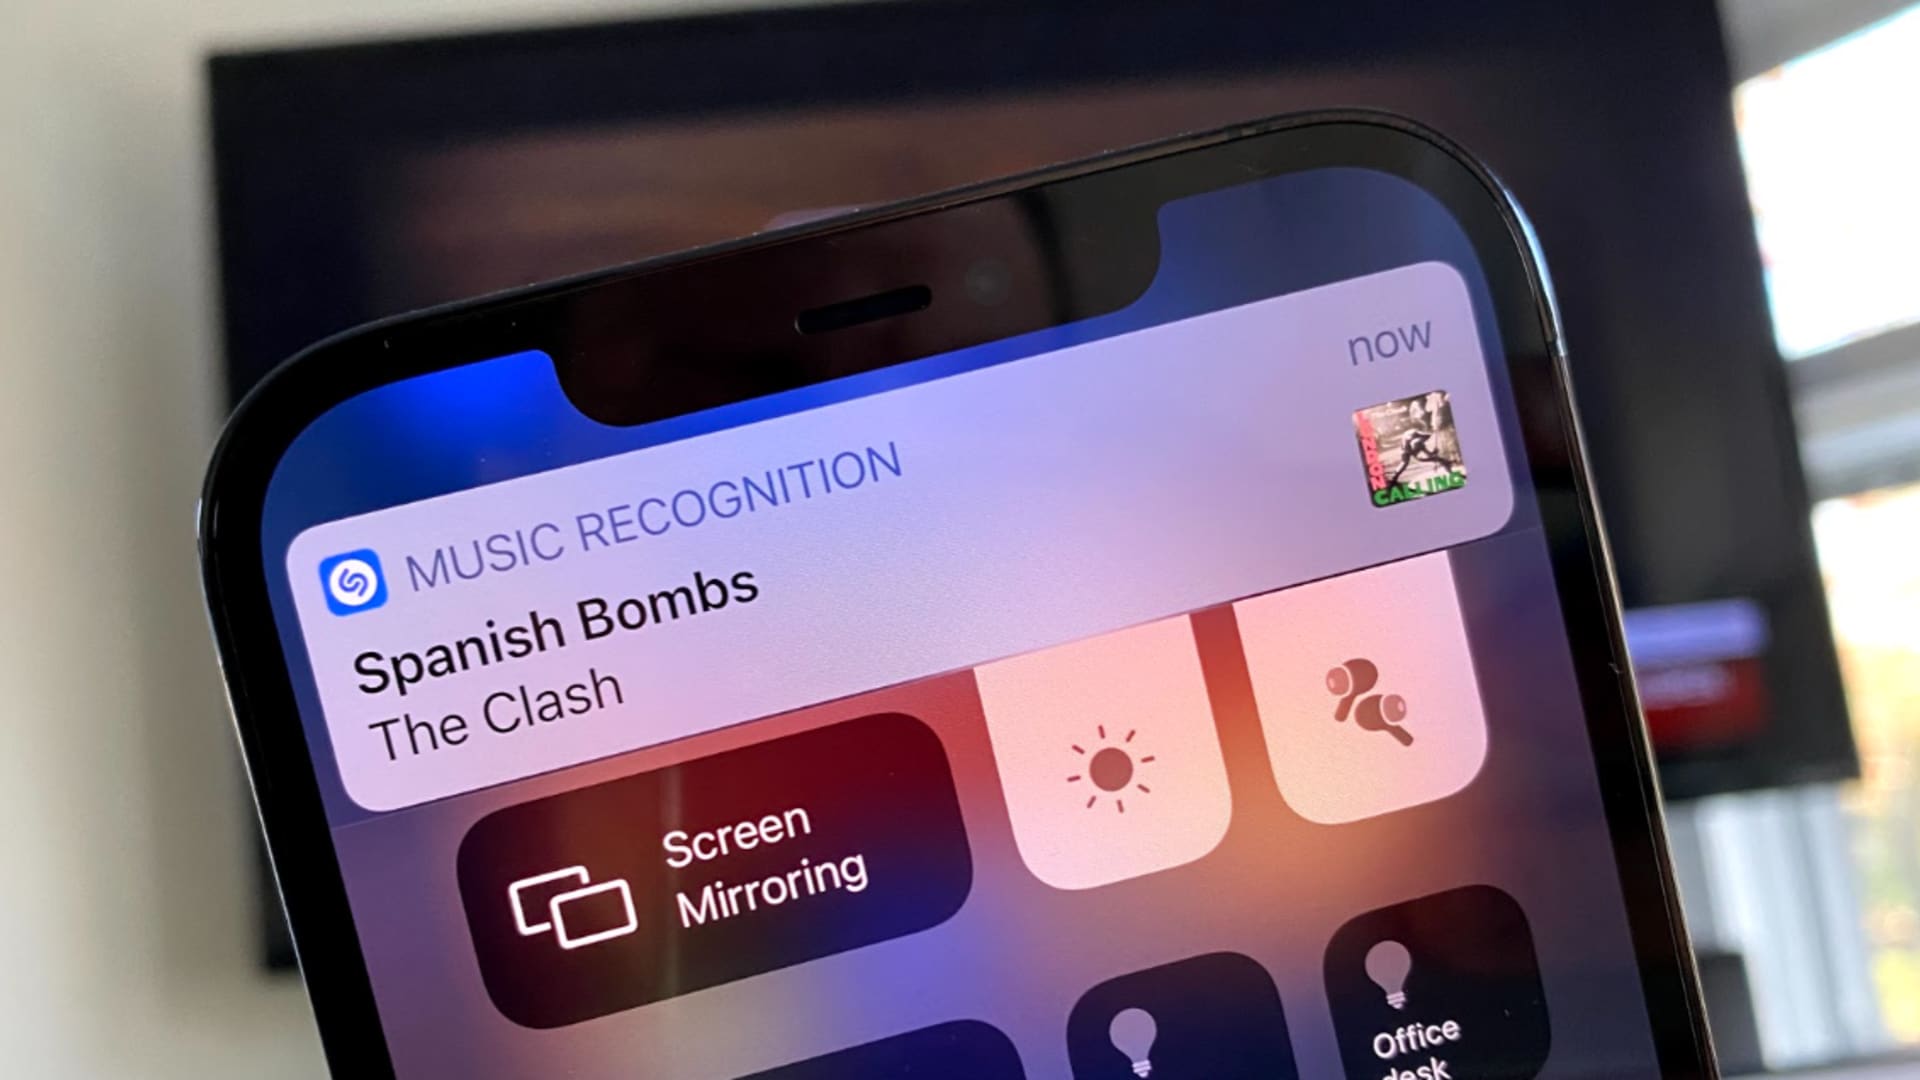 Your iPhone can recognize music with just a tap in iOS 14.2.